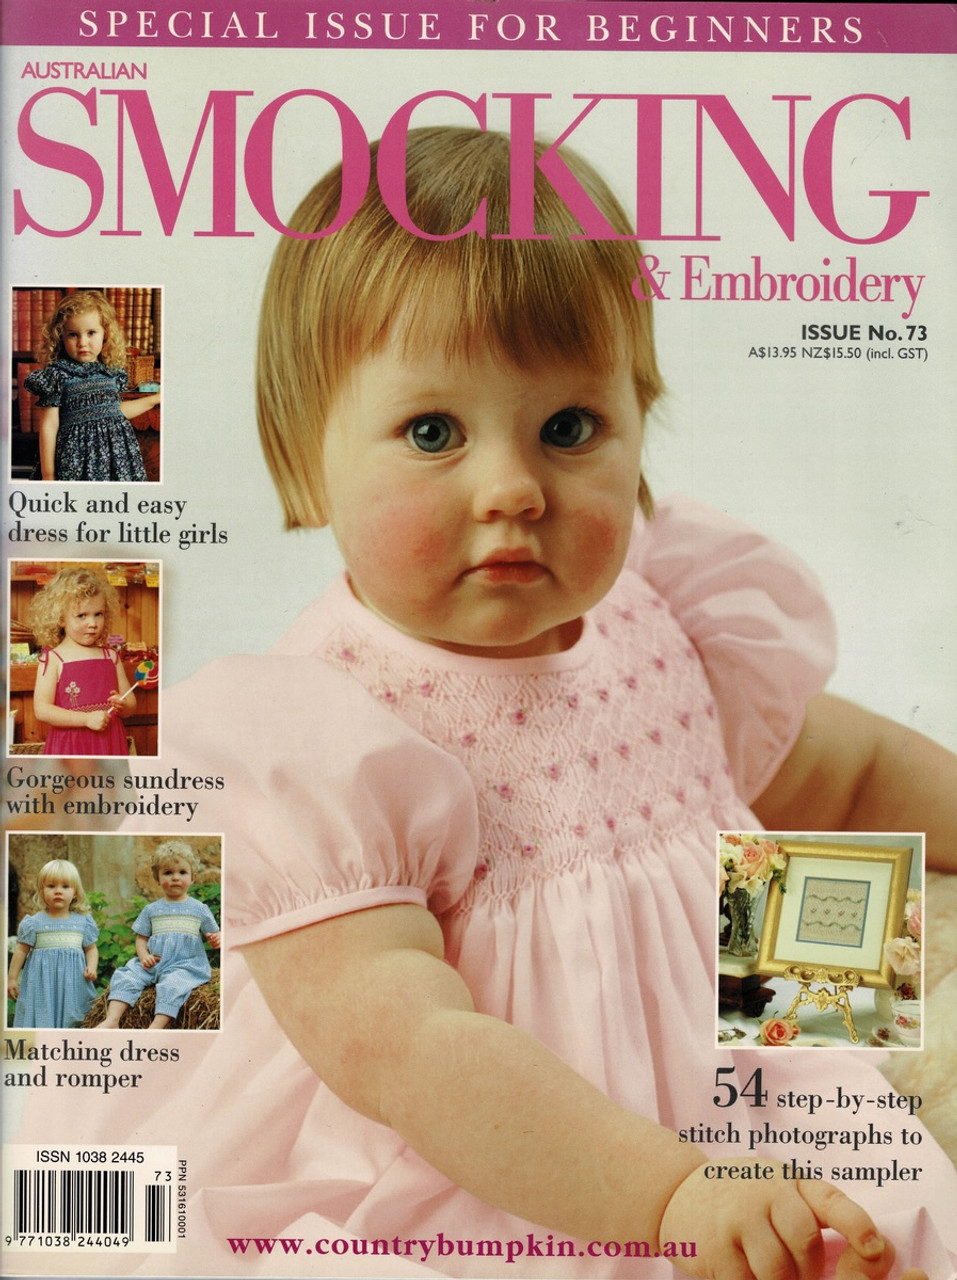 A used but very good Australian Smocking & Embroidery magazine, patterns loose but inside, filled with great smocking projects and more